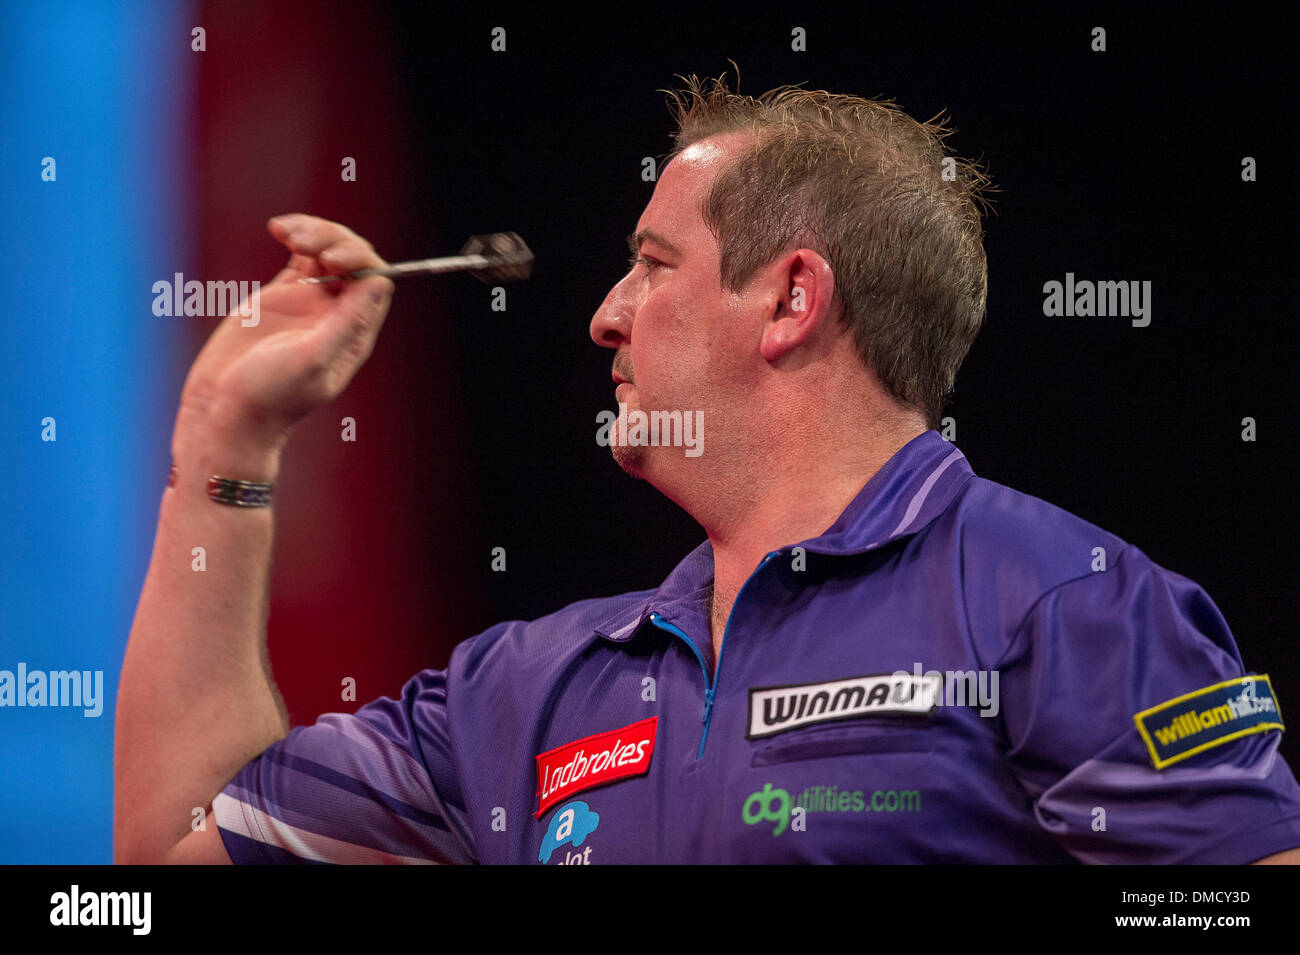 London, UK. 13th Dec, 2013. Dean Winstanley (England) in action against Richie Burnett (Wales) [28] during the Ladbrokes World Darts Championships from Alexandra Palace. Credit:  Action Plus Sports/Alamy Live News Stock Photo